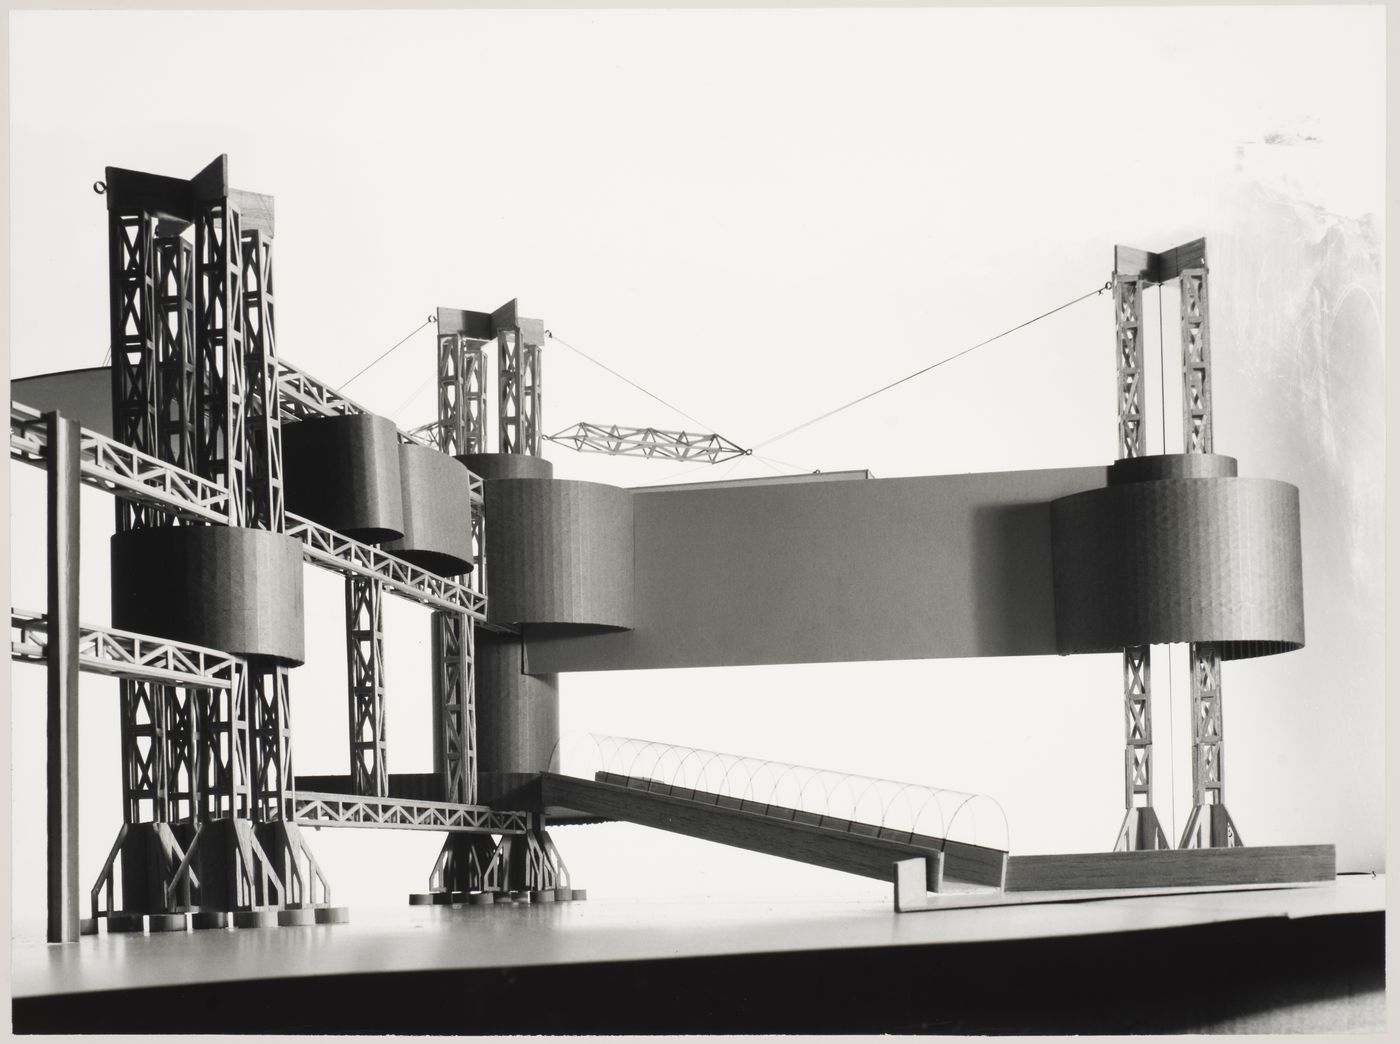 A proposed model of the Canadian Government Pavilion, Japan World Exposition, Osaka, Japan